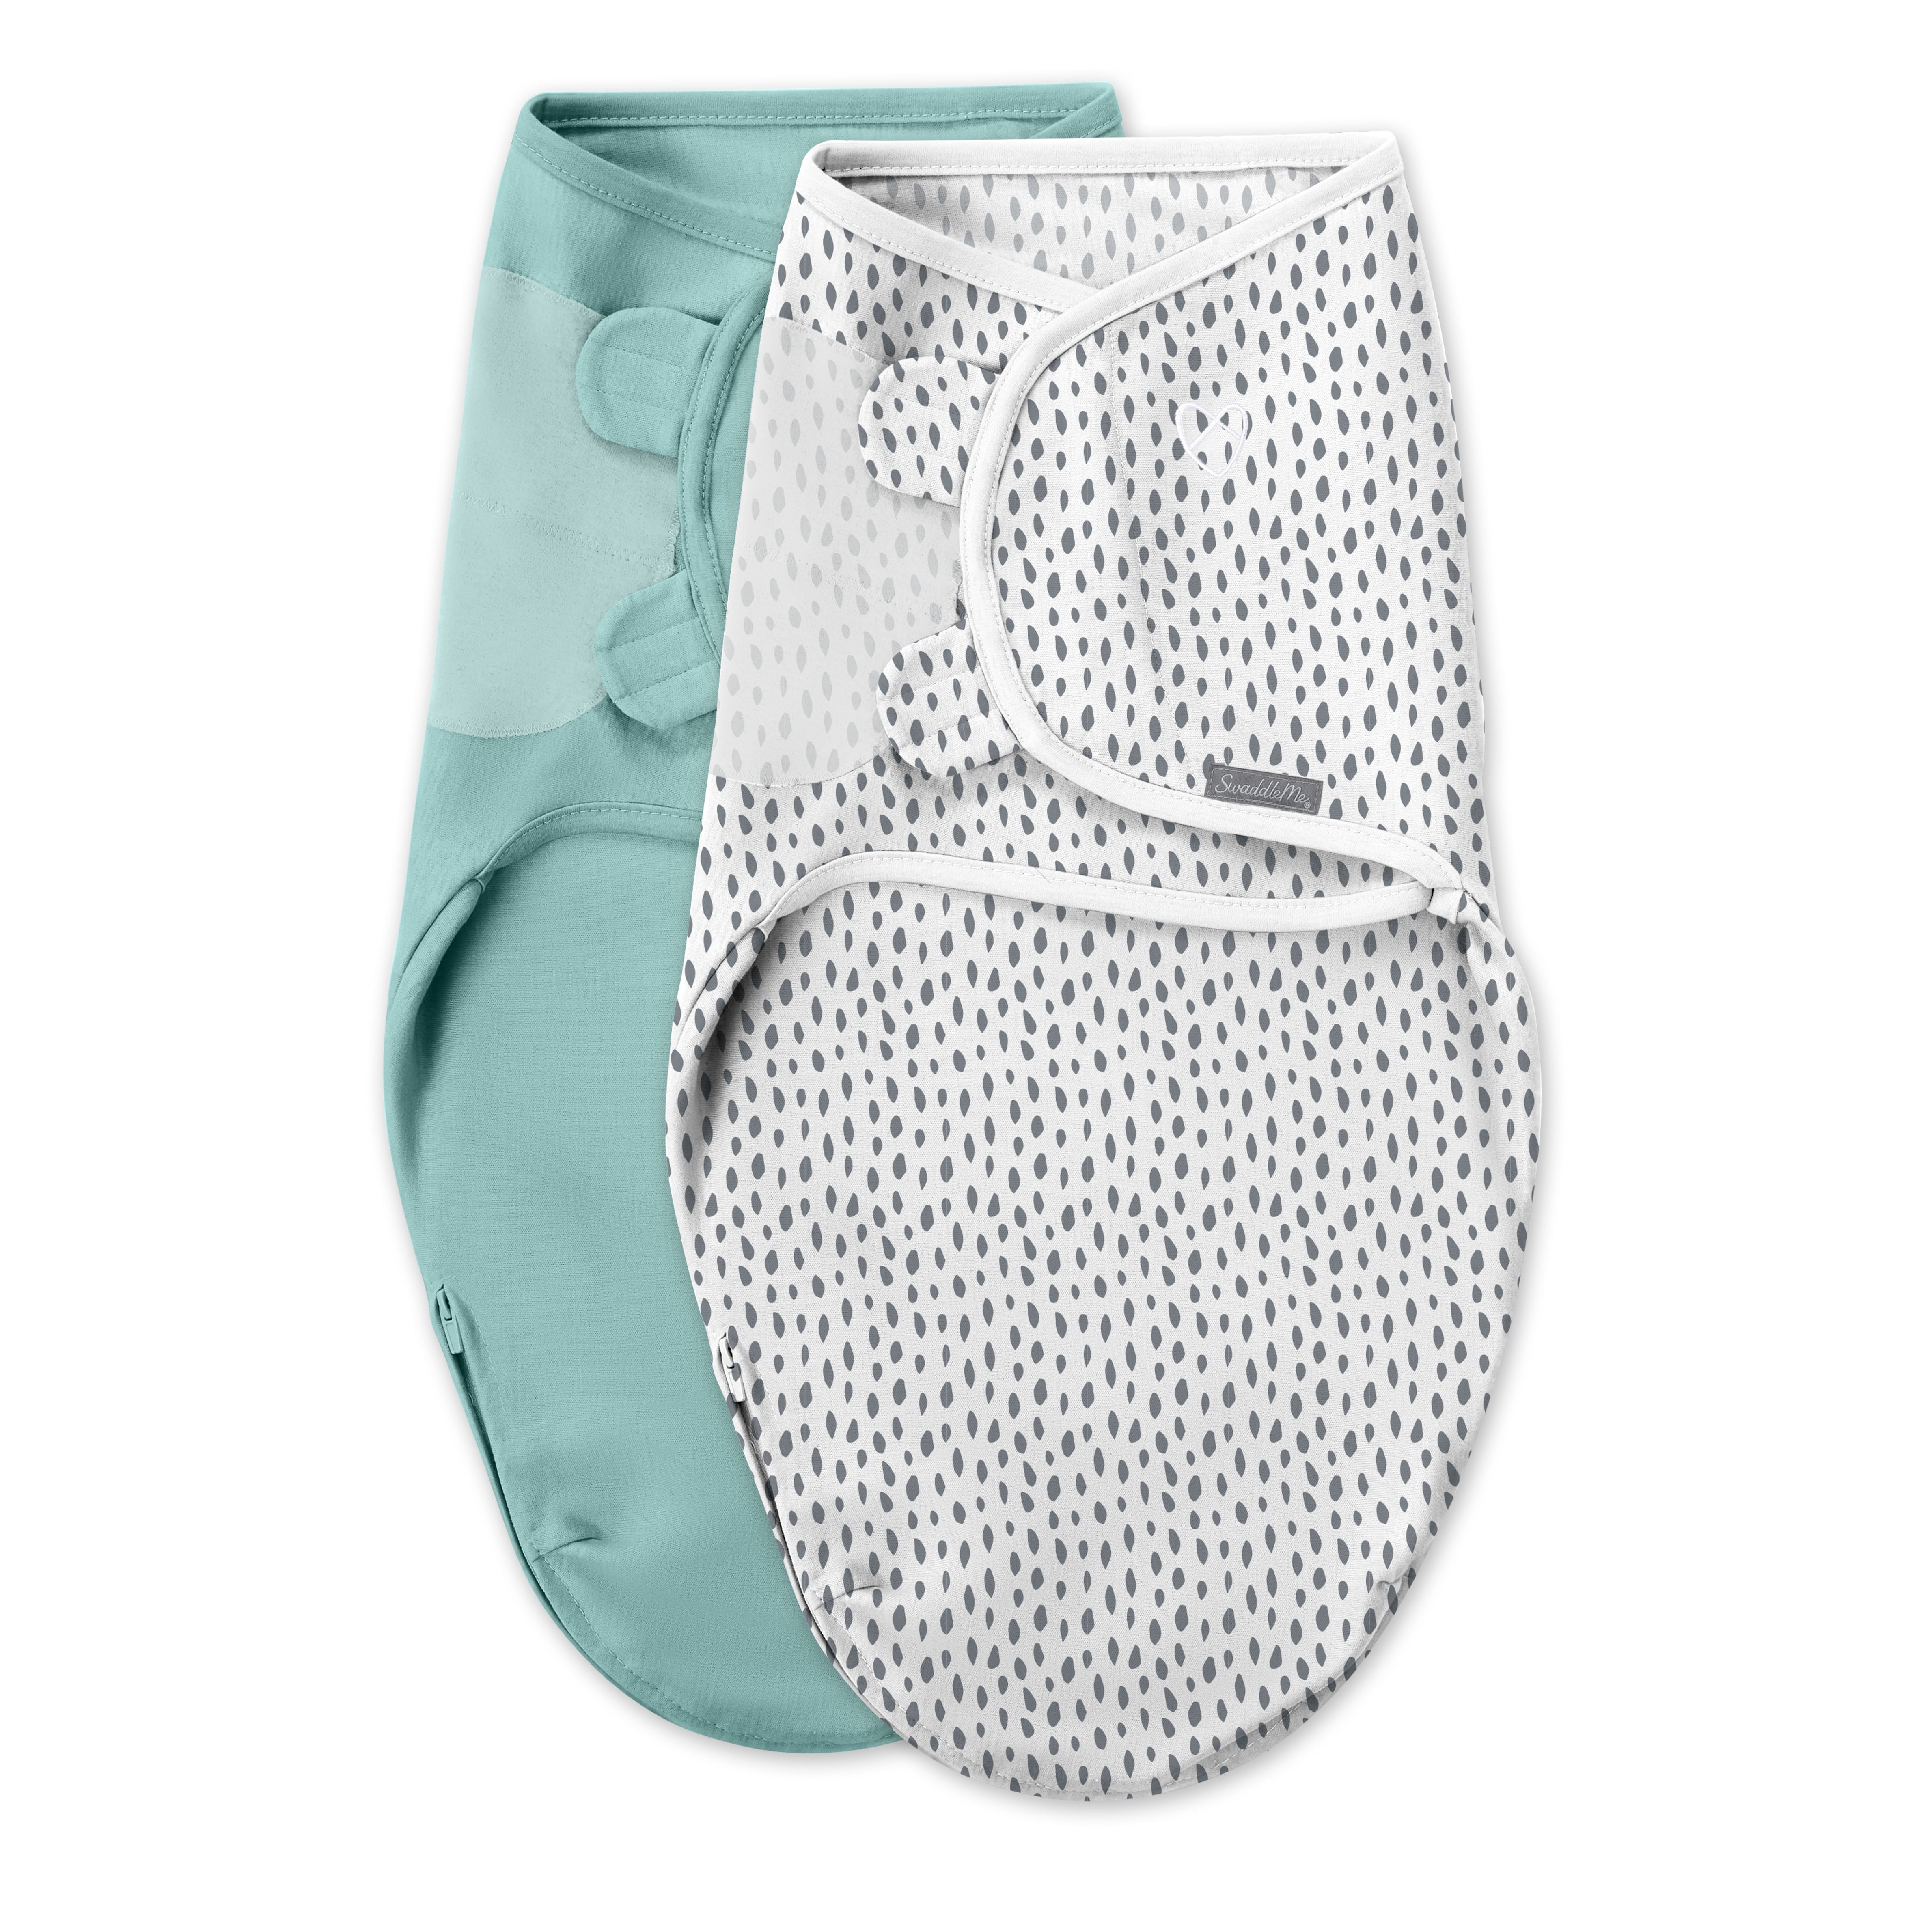 SwaddleMe Easy Change Swaddle  Size Small/Medium, 0-3 Months, 2-Pack (Snow Leopard)